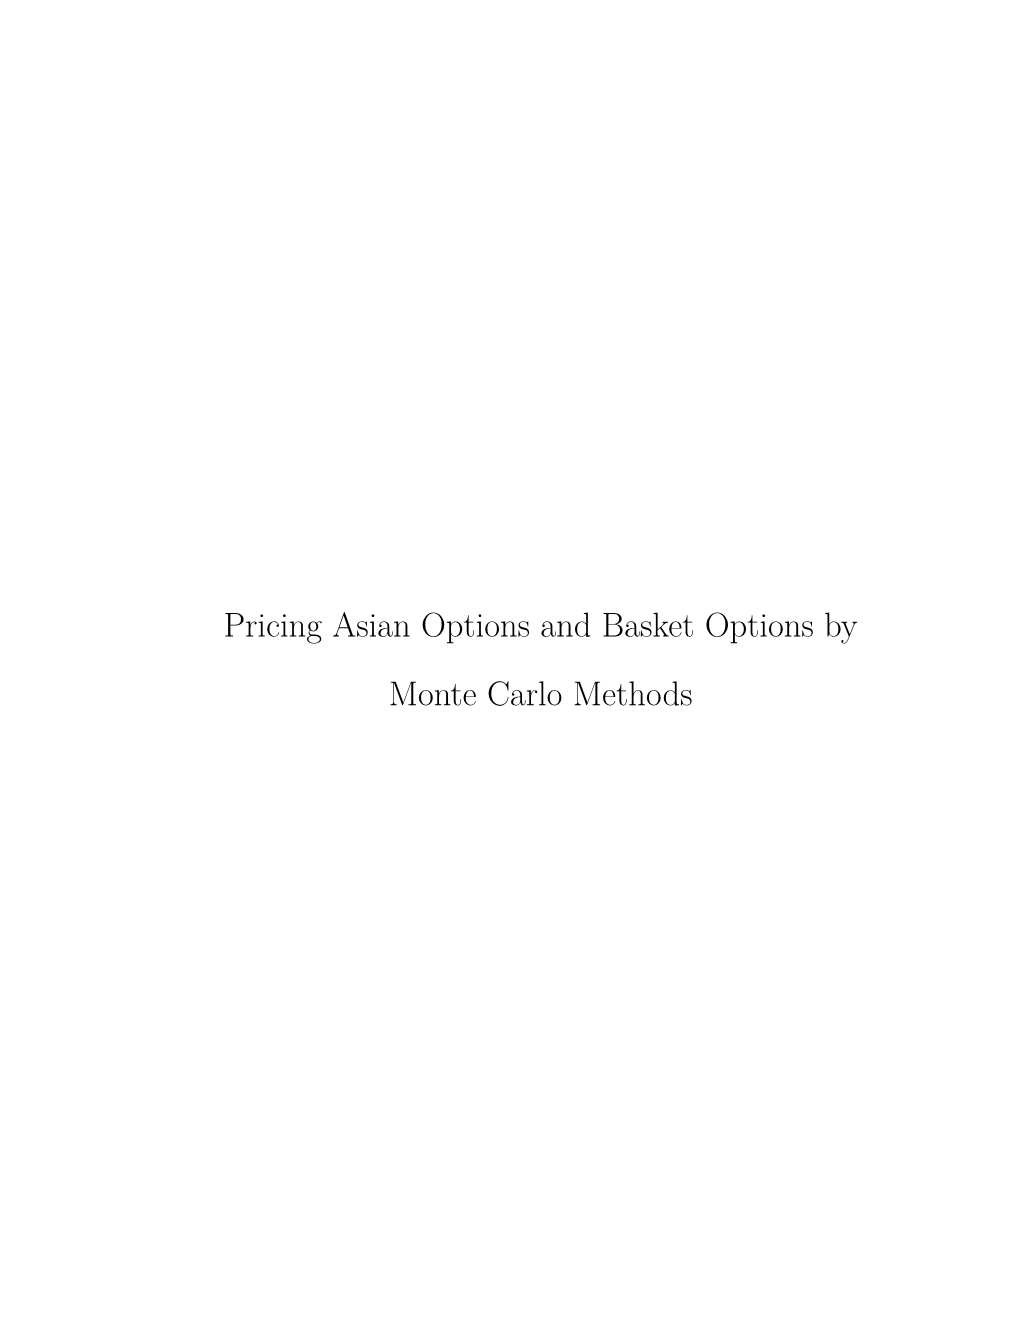 Pricing Asian Options and Basket Options by Monte Carlo Methods PRICING ASIAN OPTIONS and BASKET OPTIONS BY